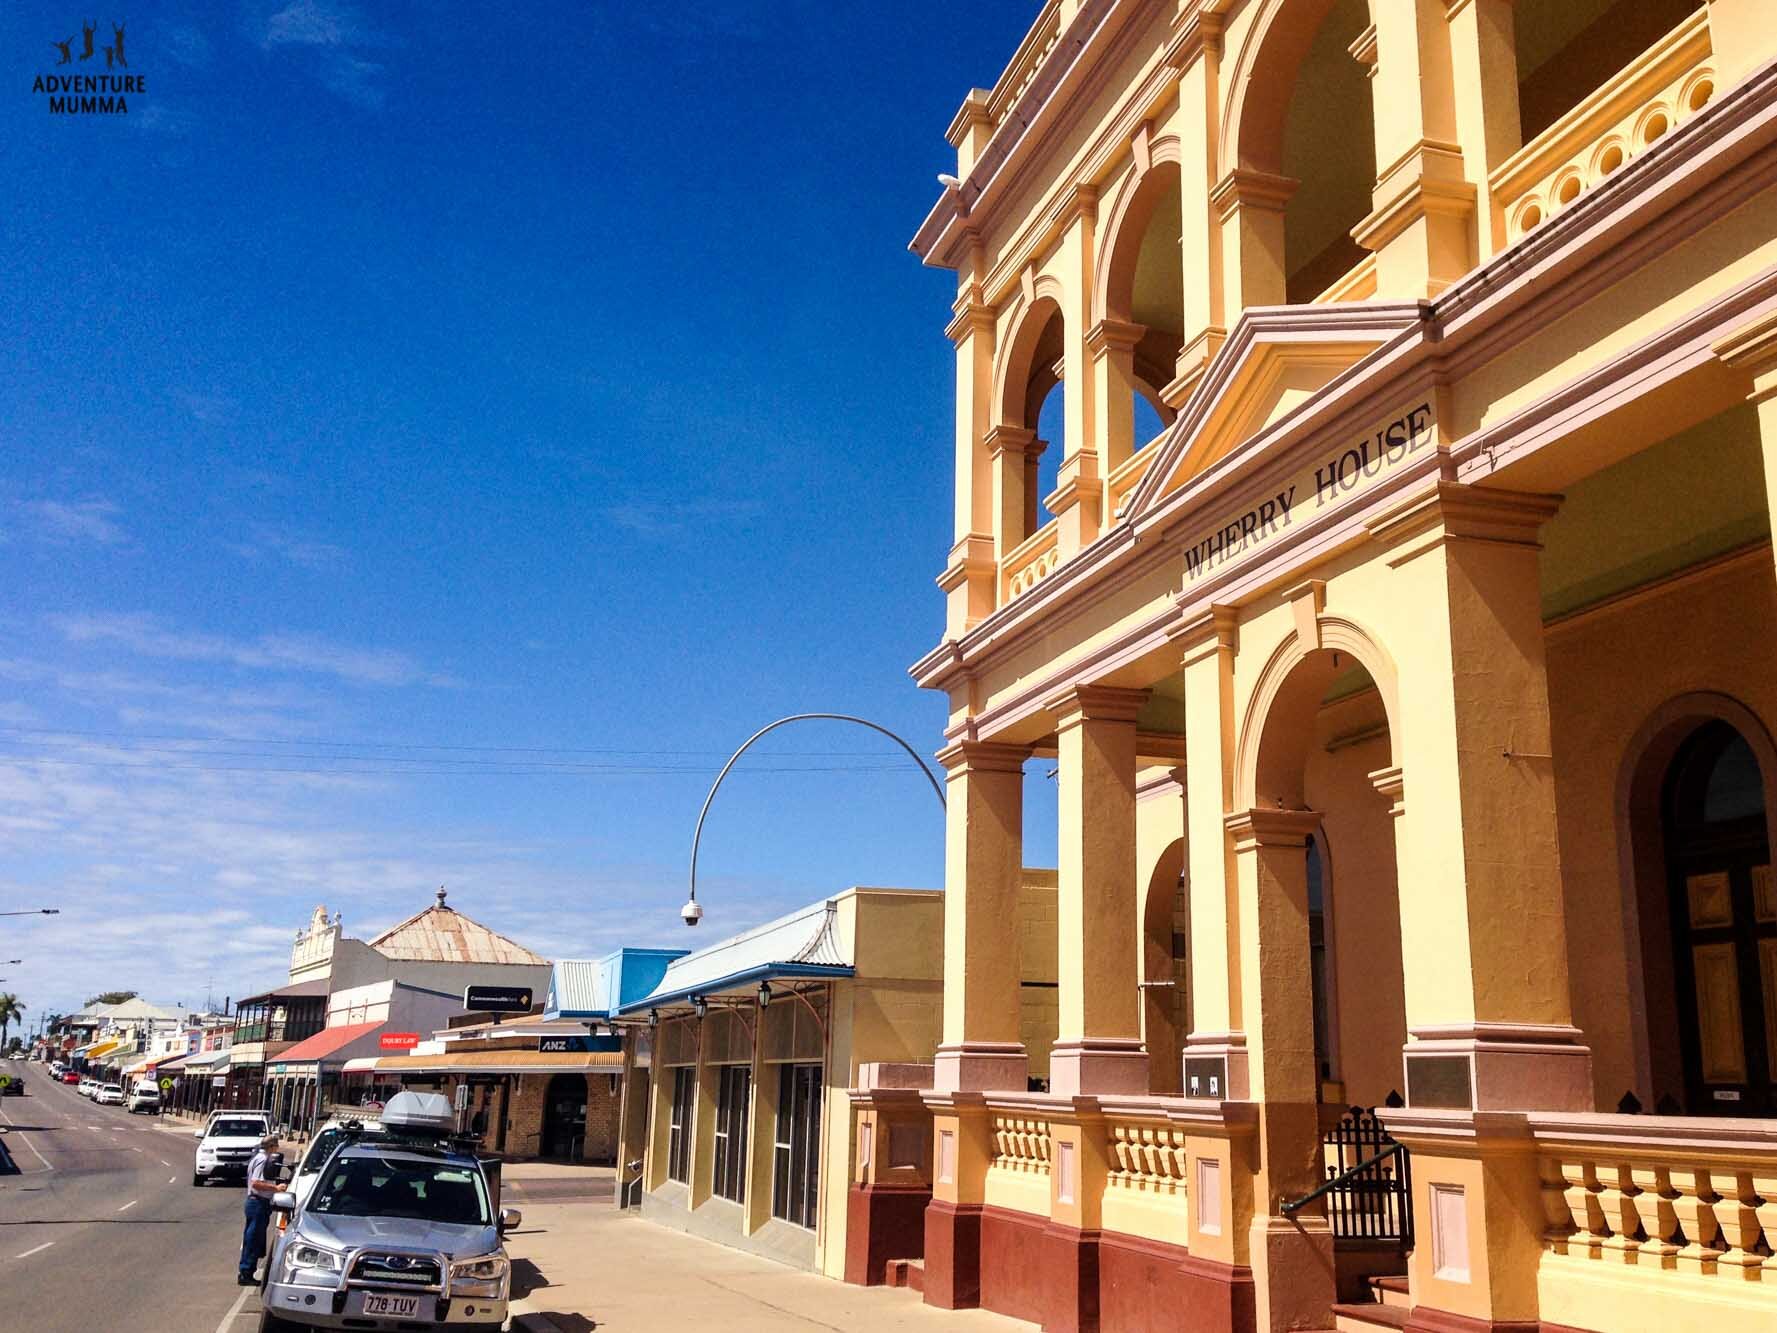 Charters Towers has the coolest buildings